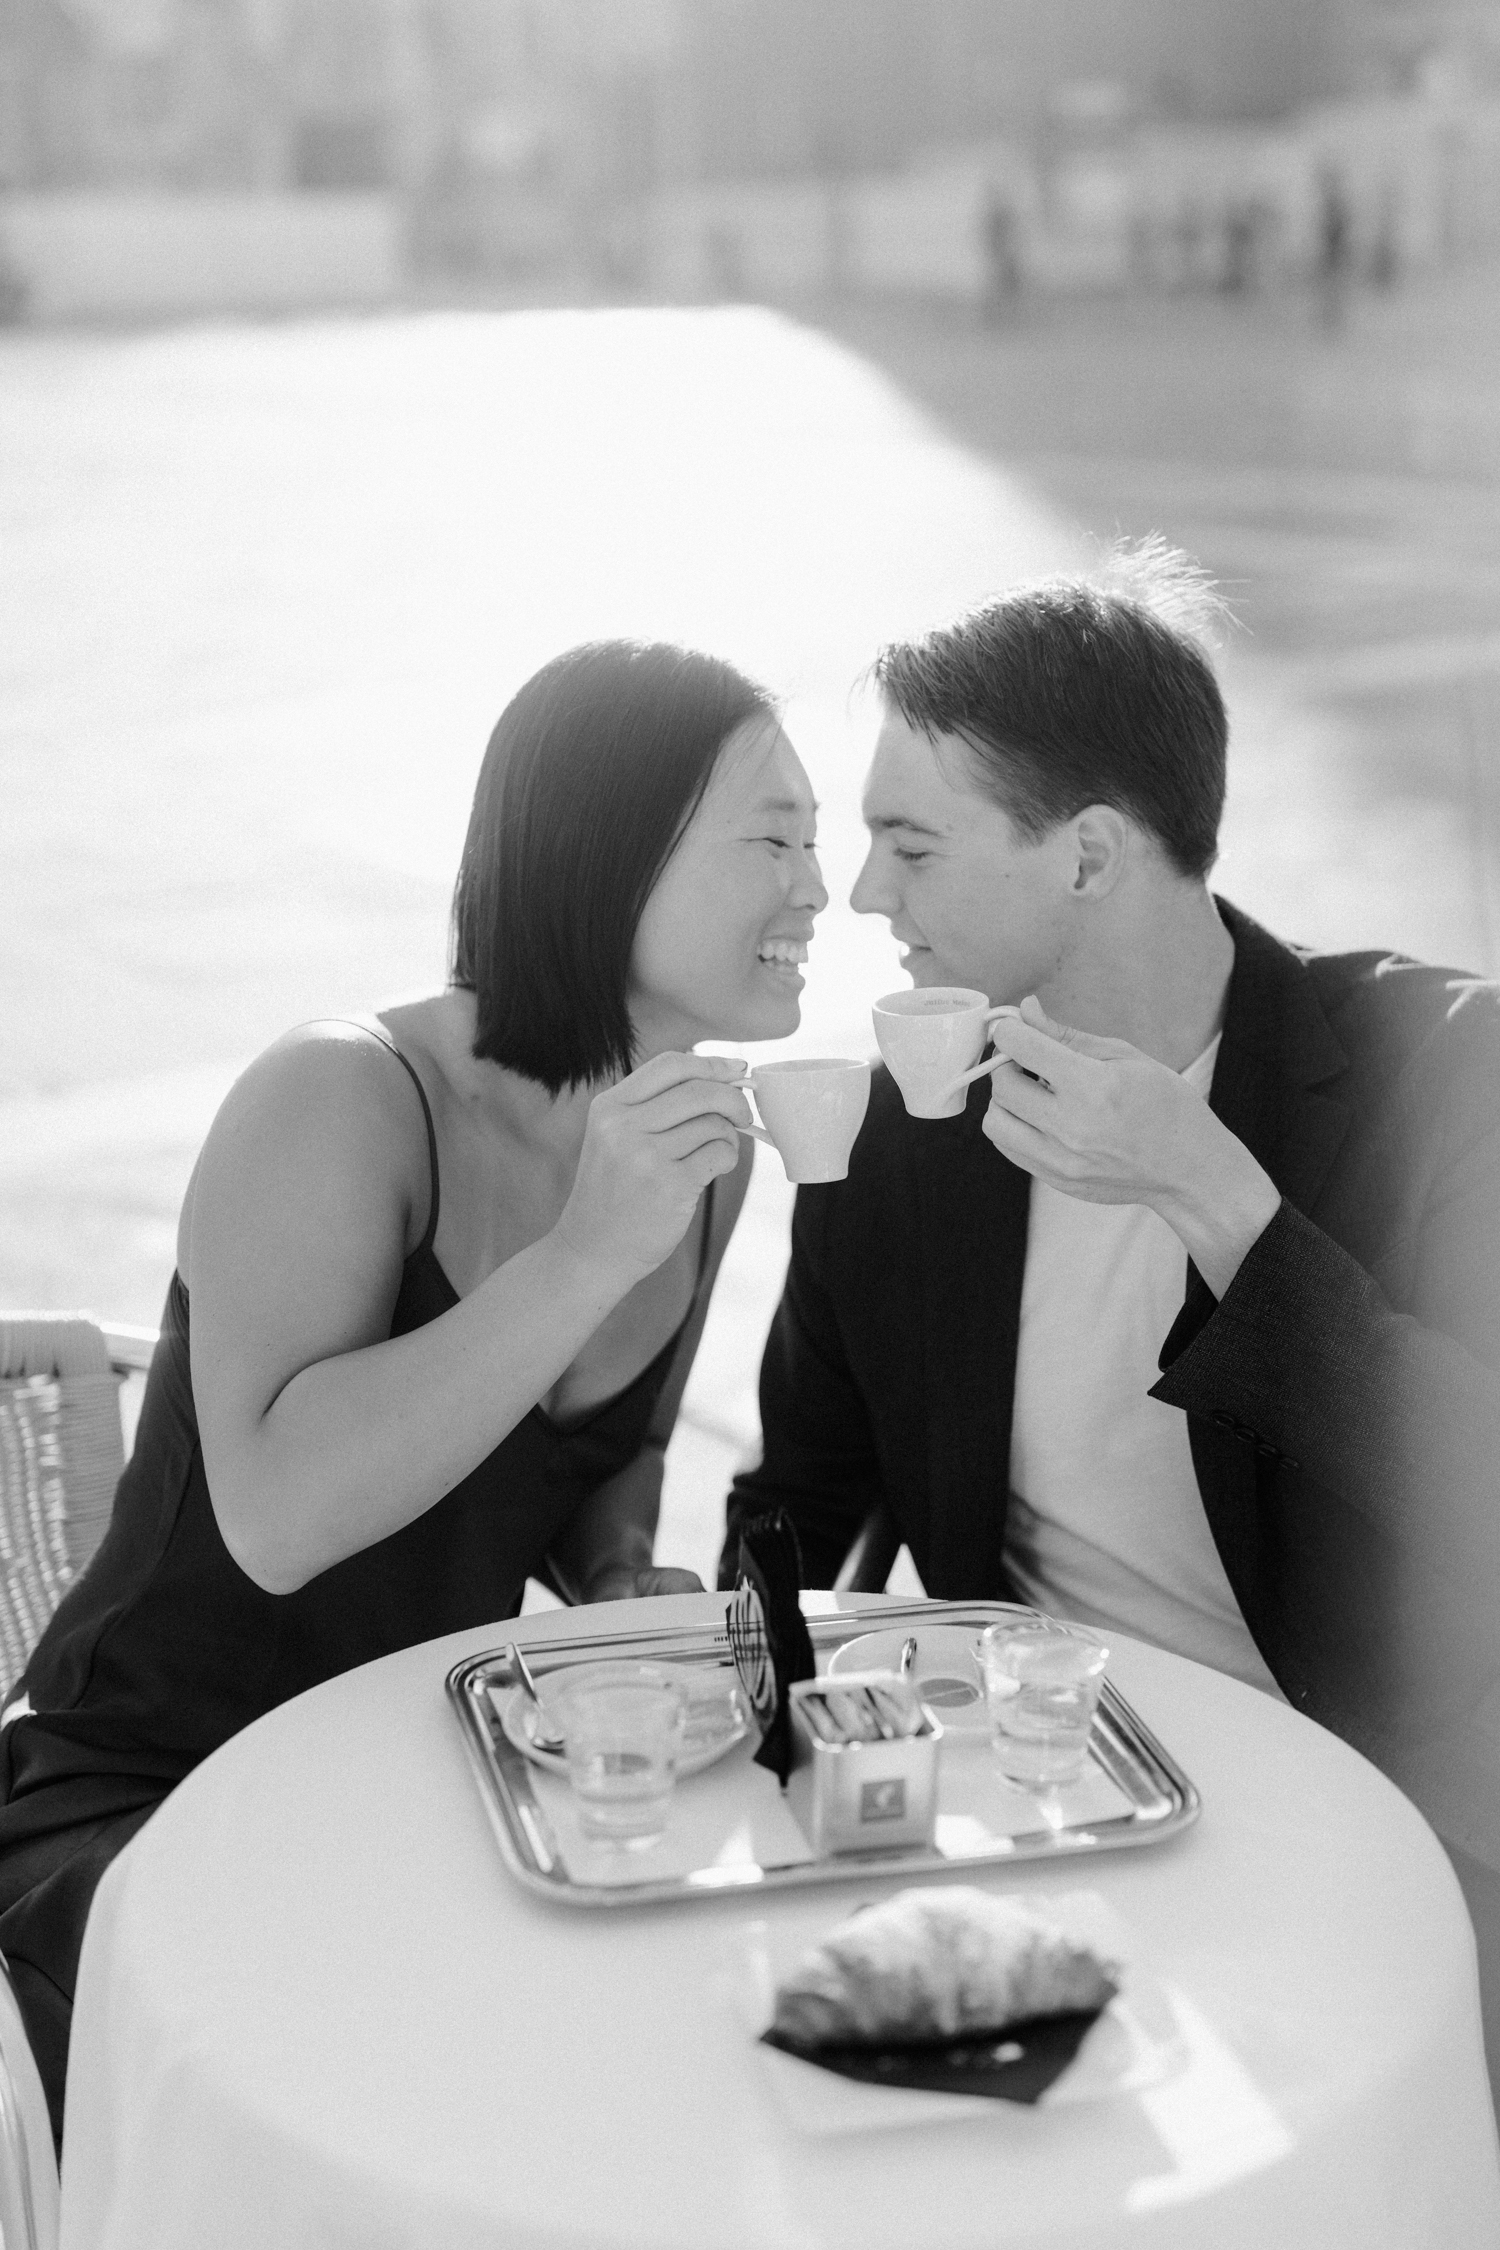 Book the best freelance photographer in Venice for a romantic photoshoot